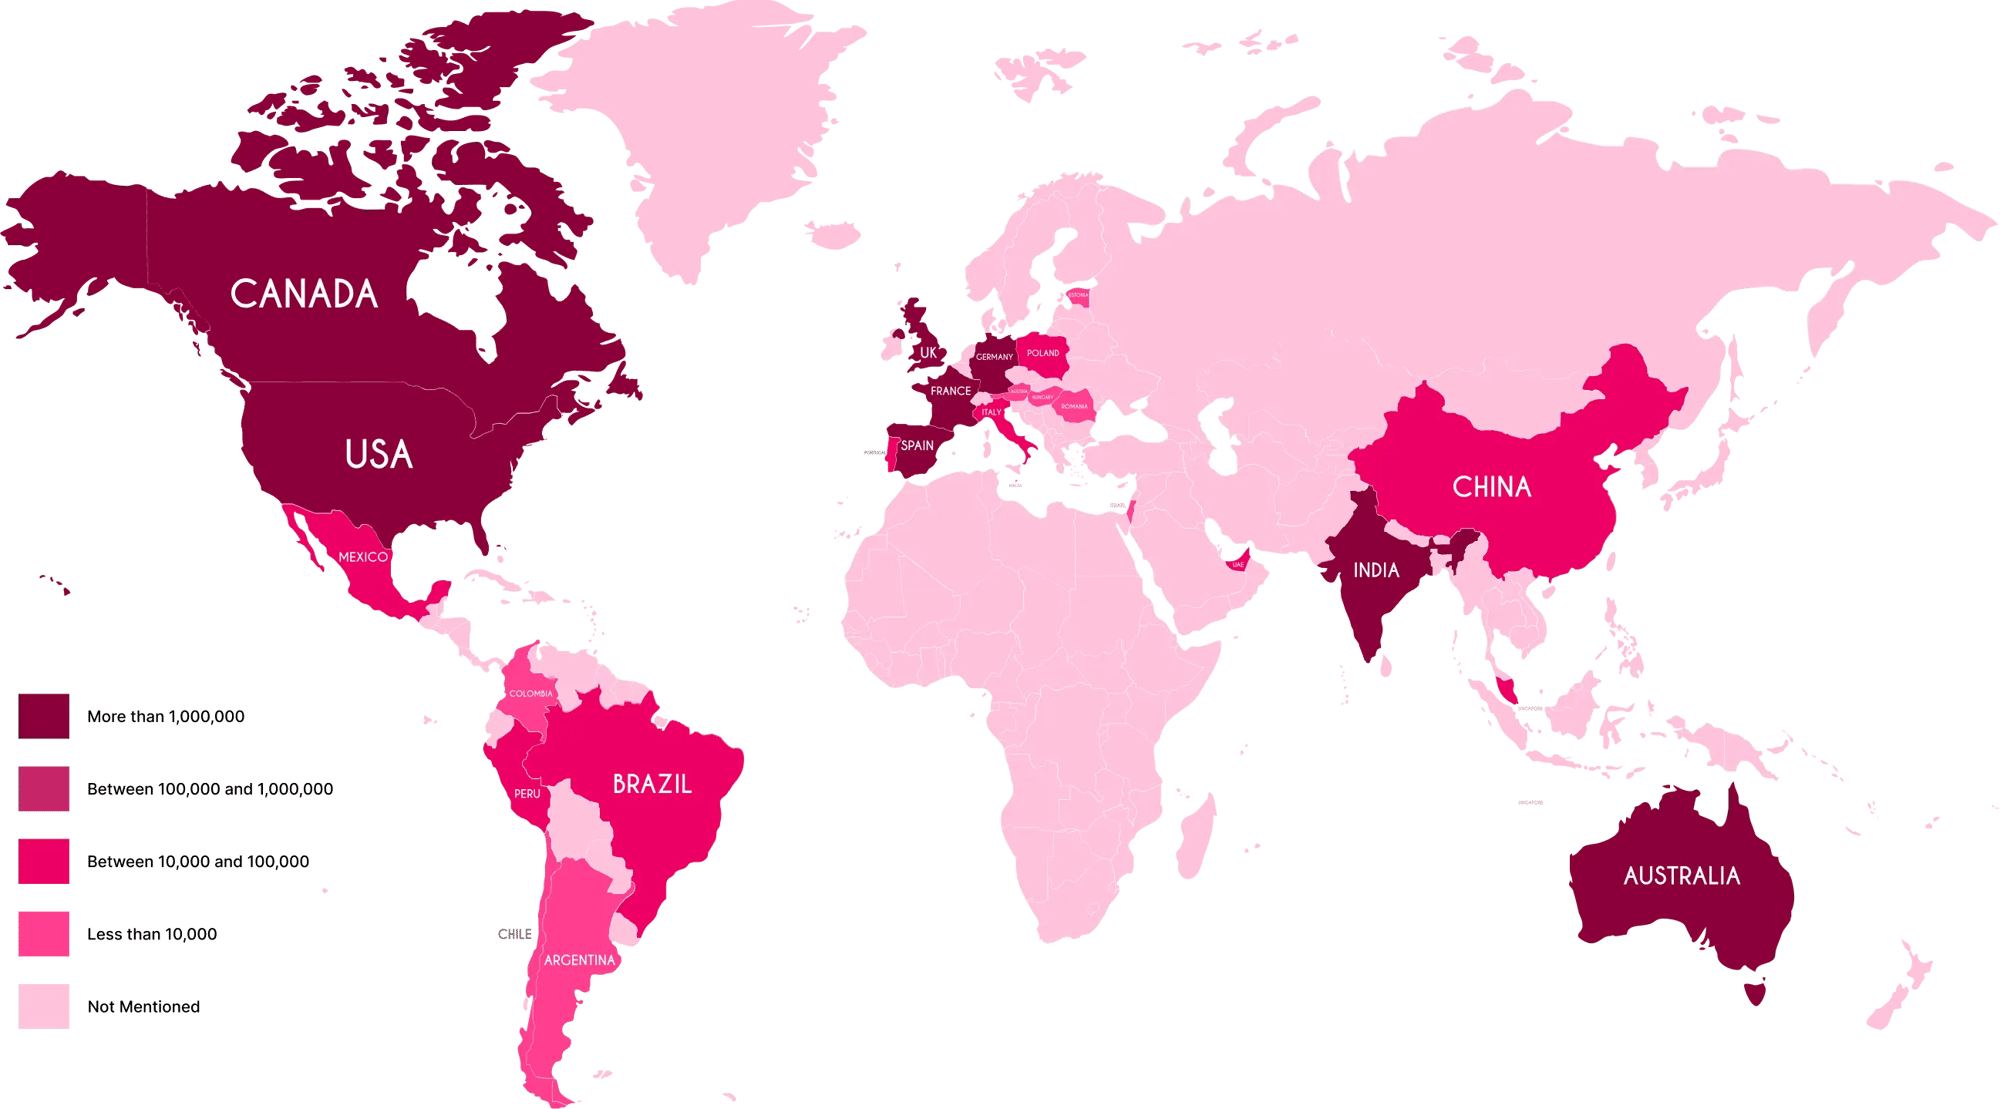 Kaspr global data coverage map - number of enriched phone numbers on profiles